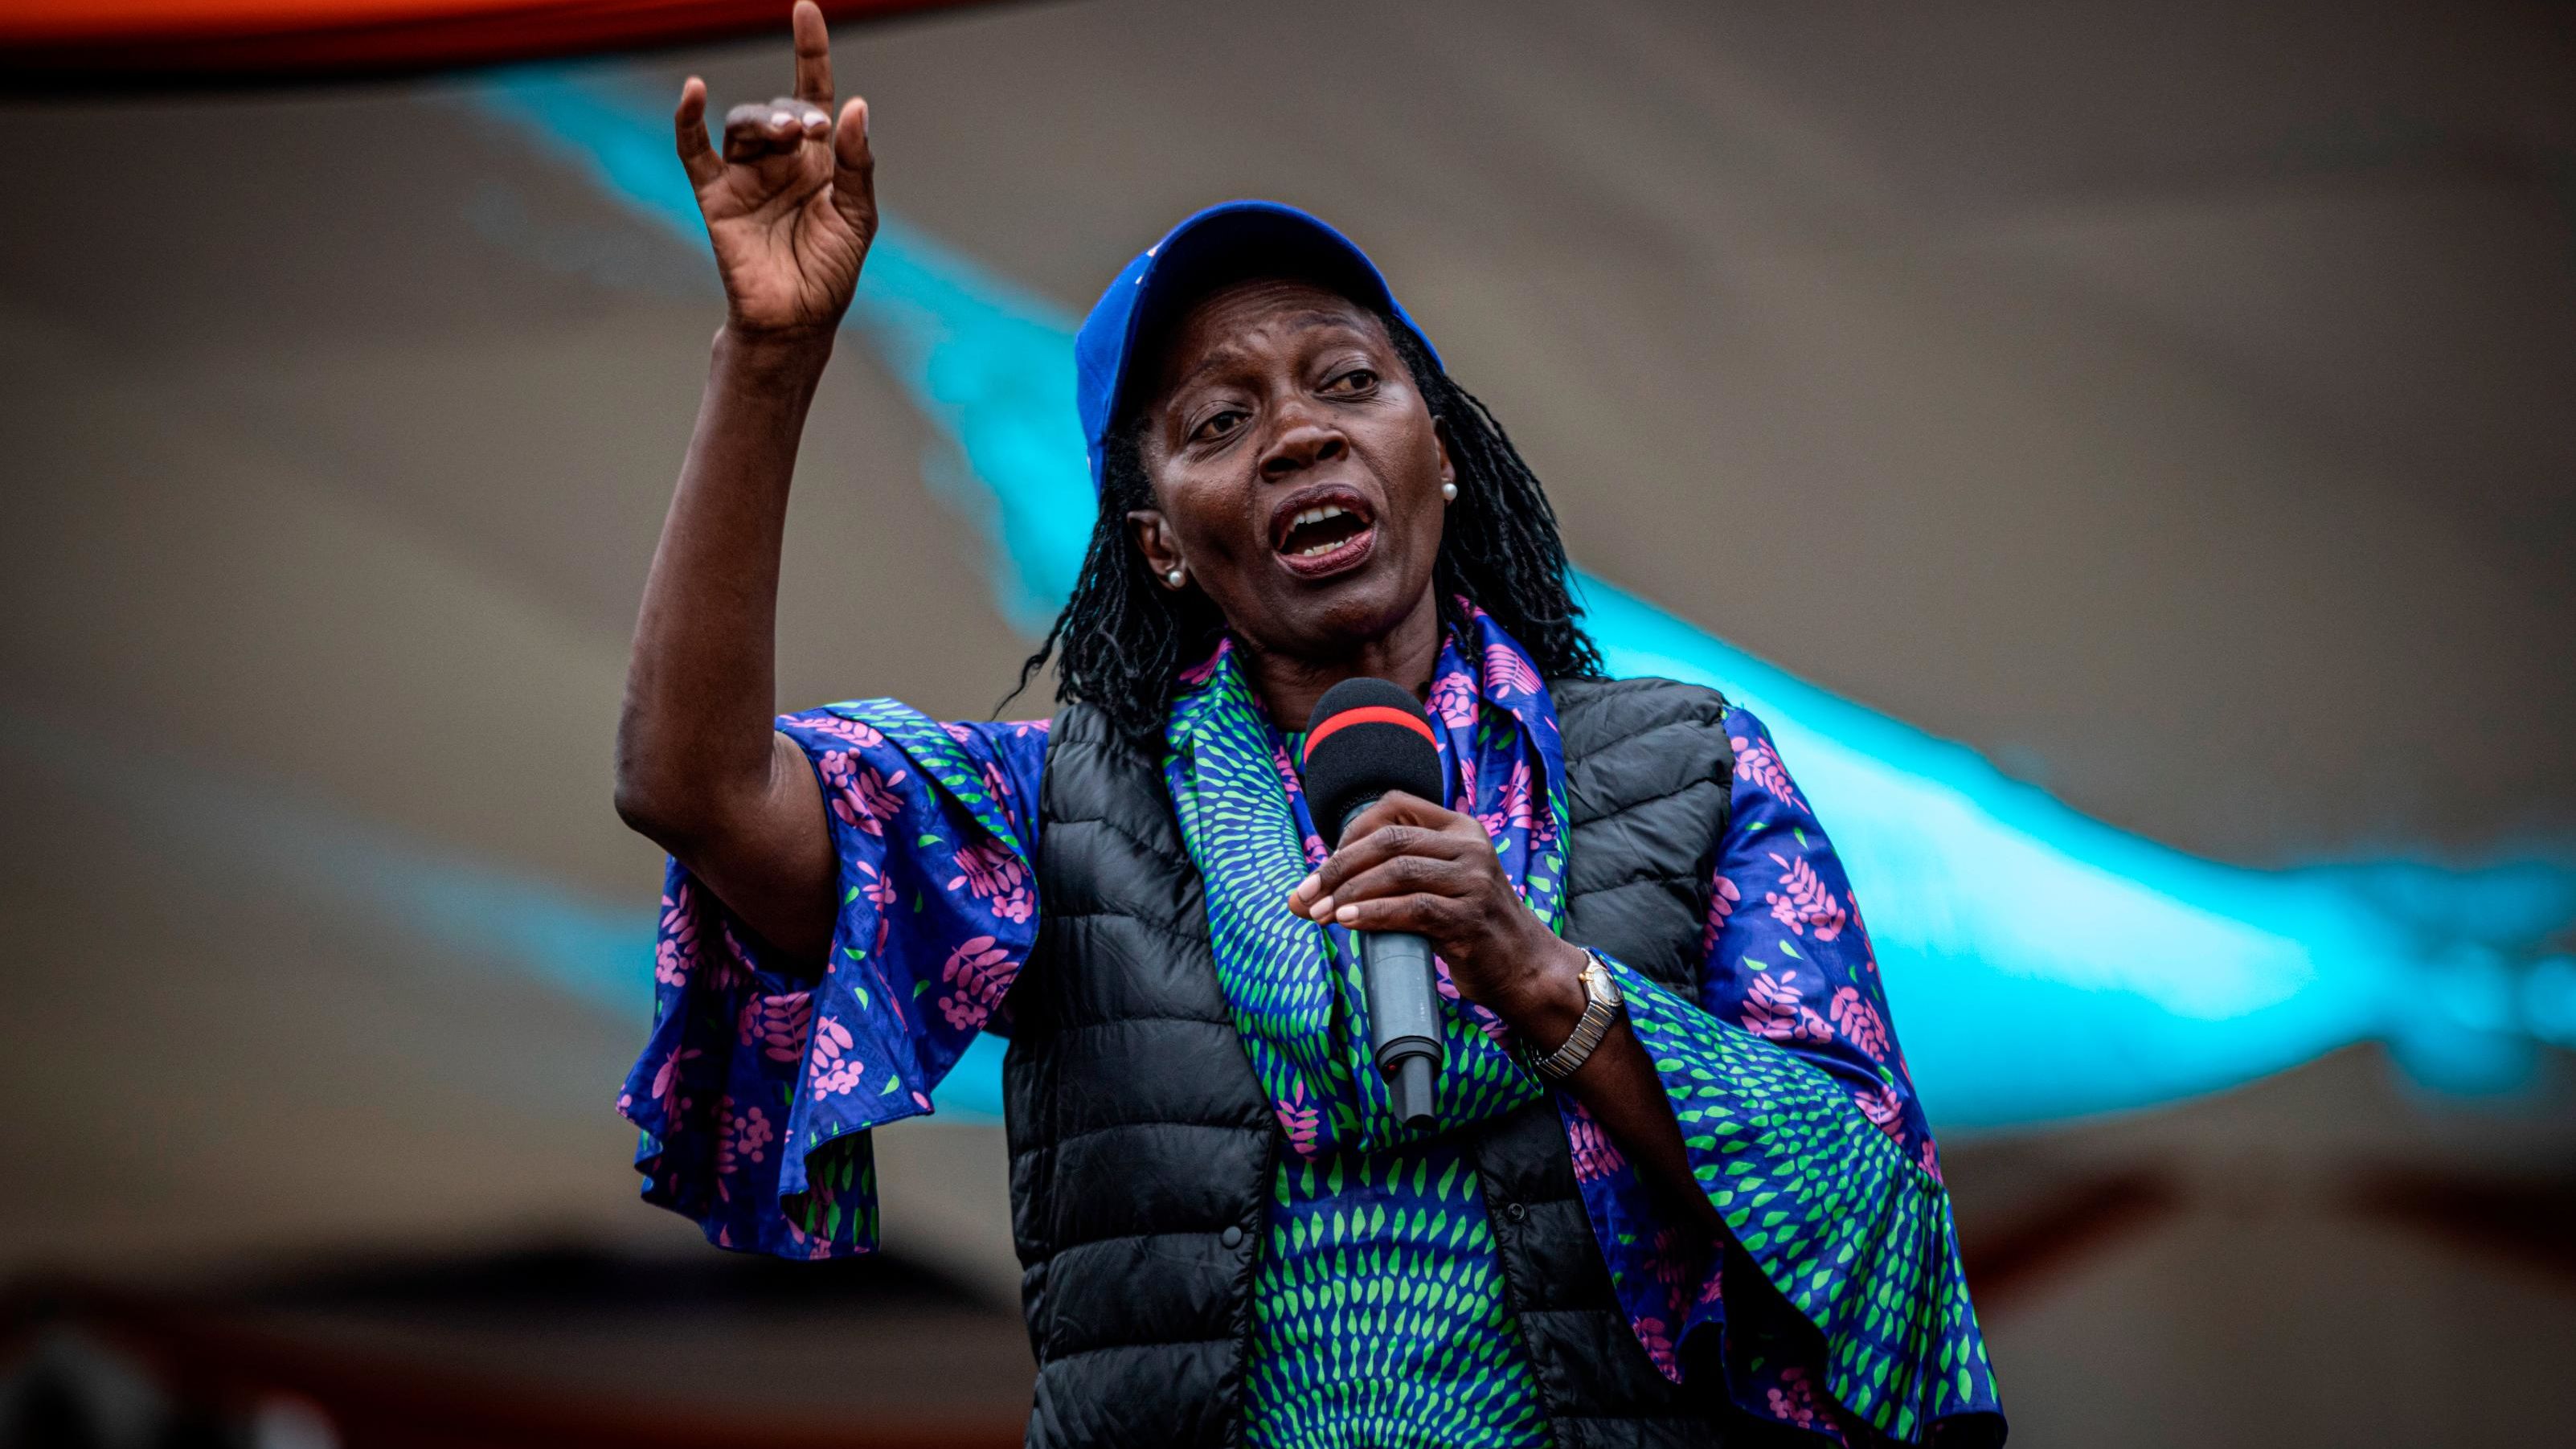 Veteran politician and former Justice Minister Martha Karua addresses a crowd during a campaign rally in Kirigiti Stadium on August 1, in Kiambu, Kenya. If elected, she will become the country's first female deputy president.